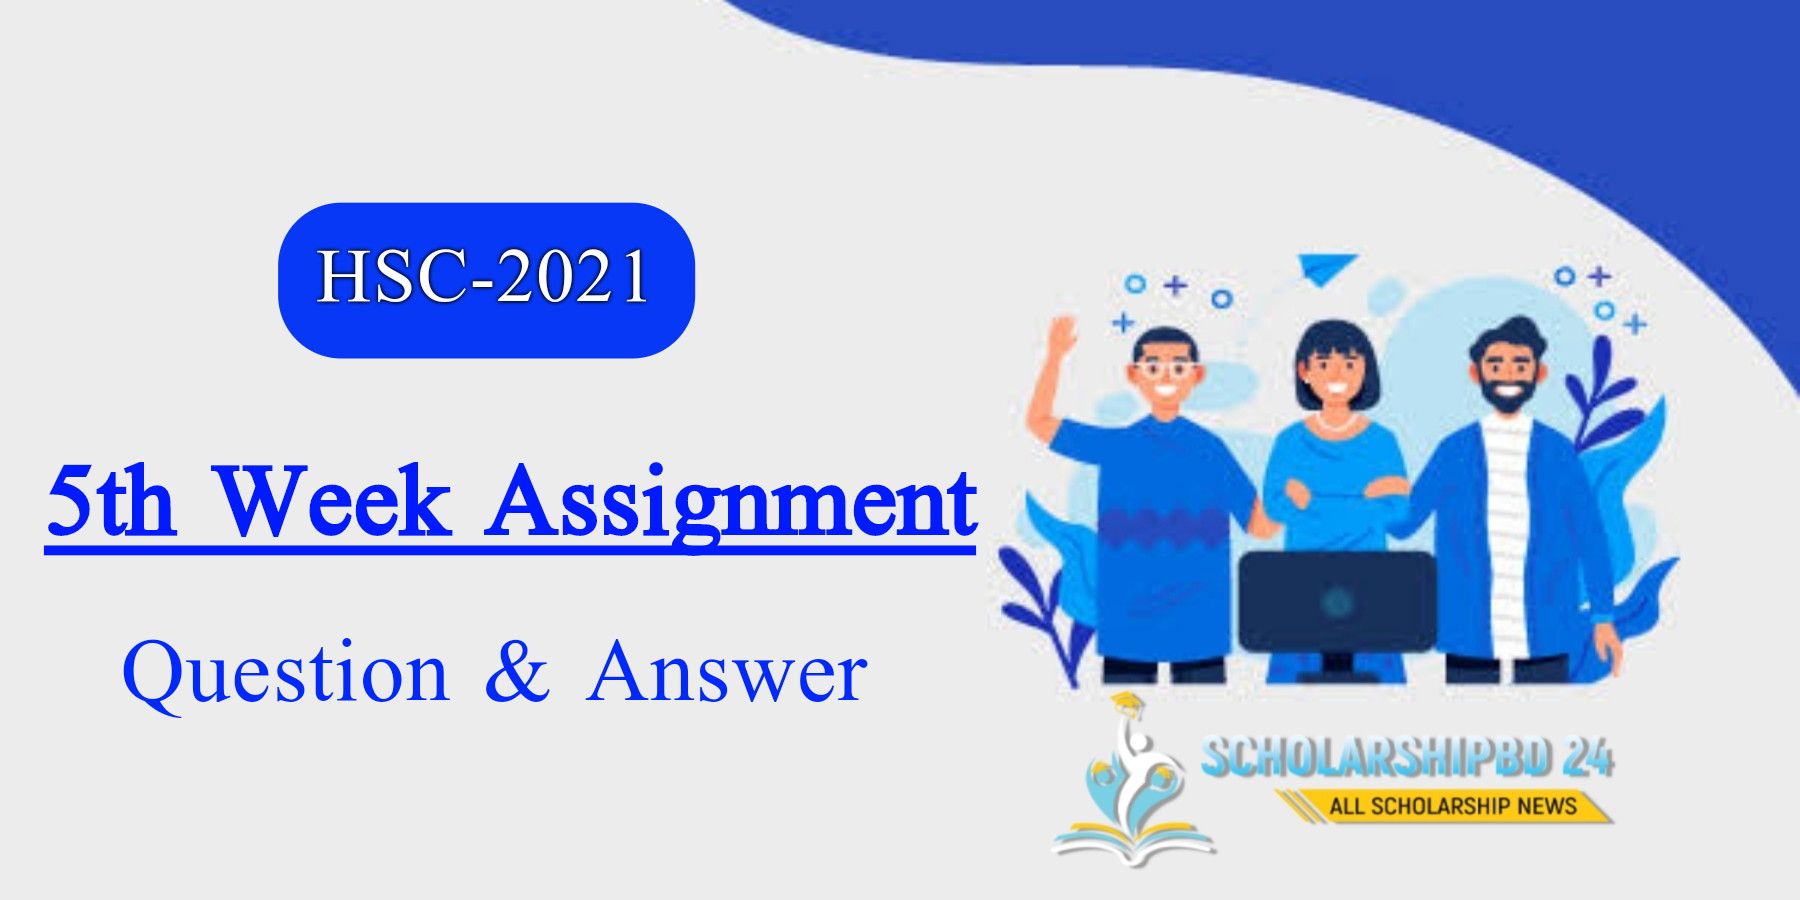 assignment of 5th week